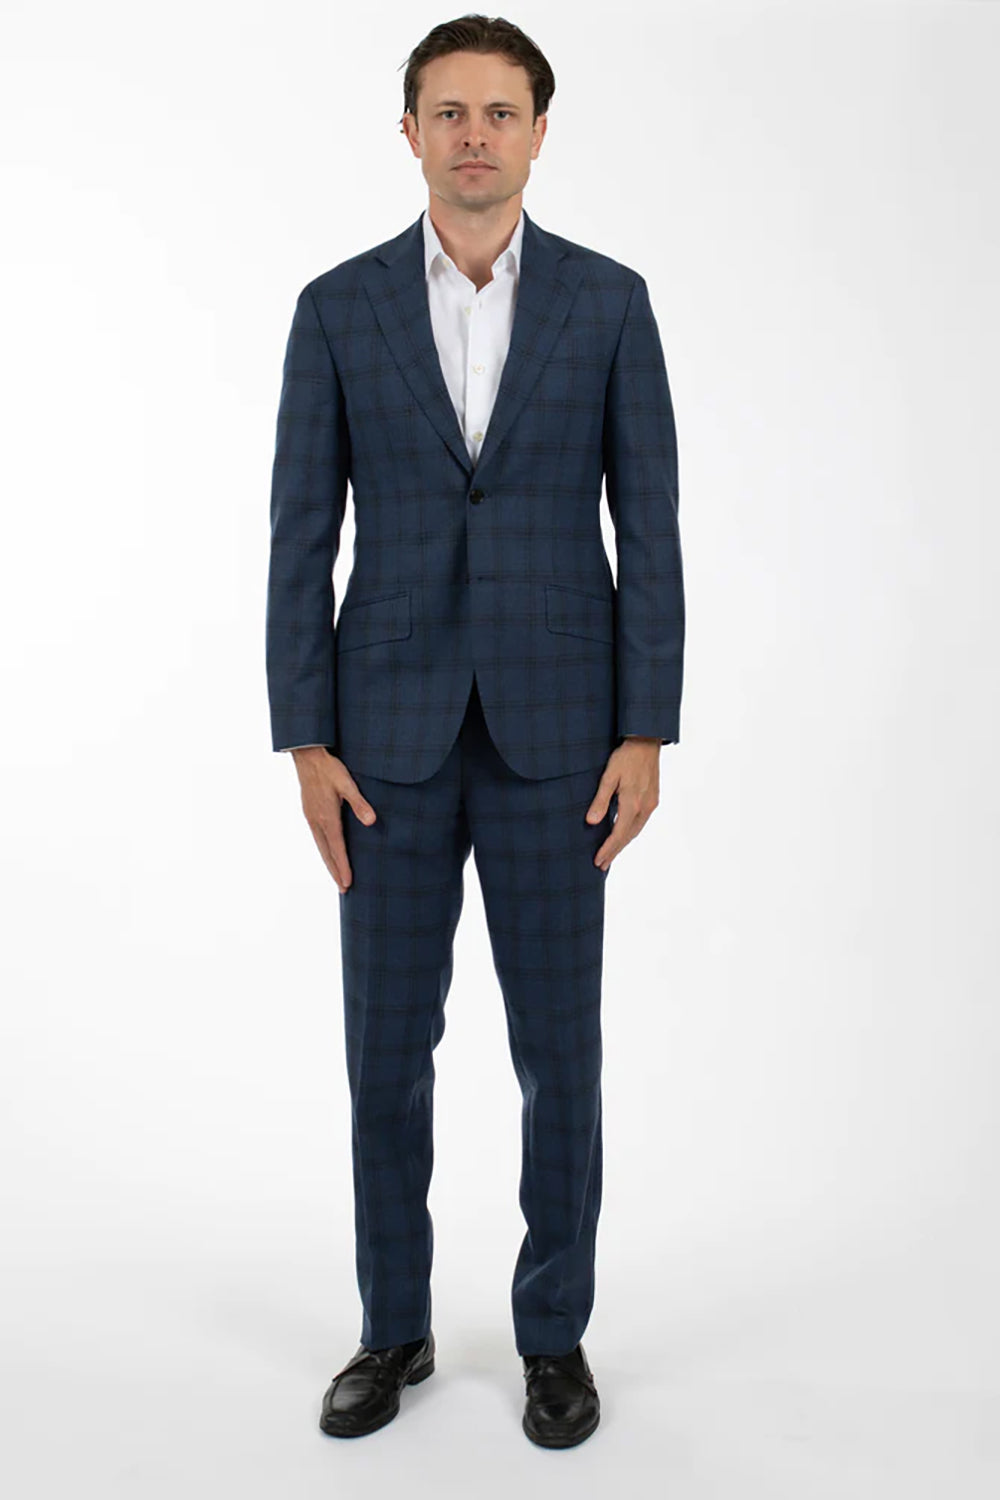 Blue Window Pane Check Suit - Haig-Harrison's Men's Hire and Tailoring